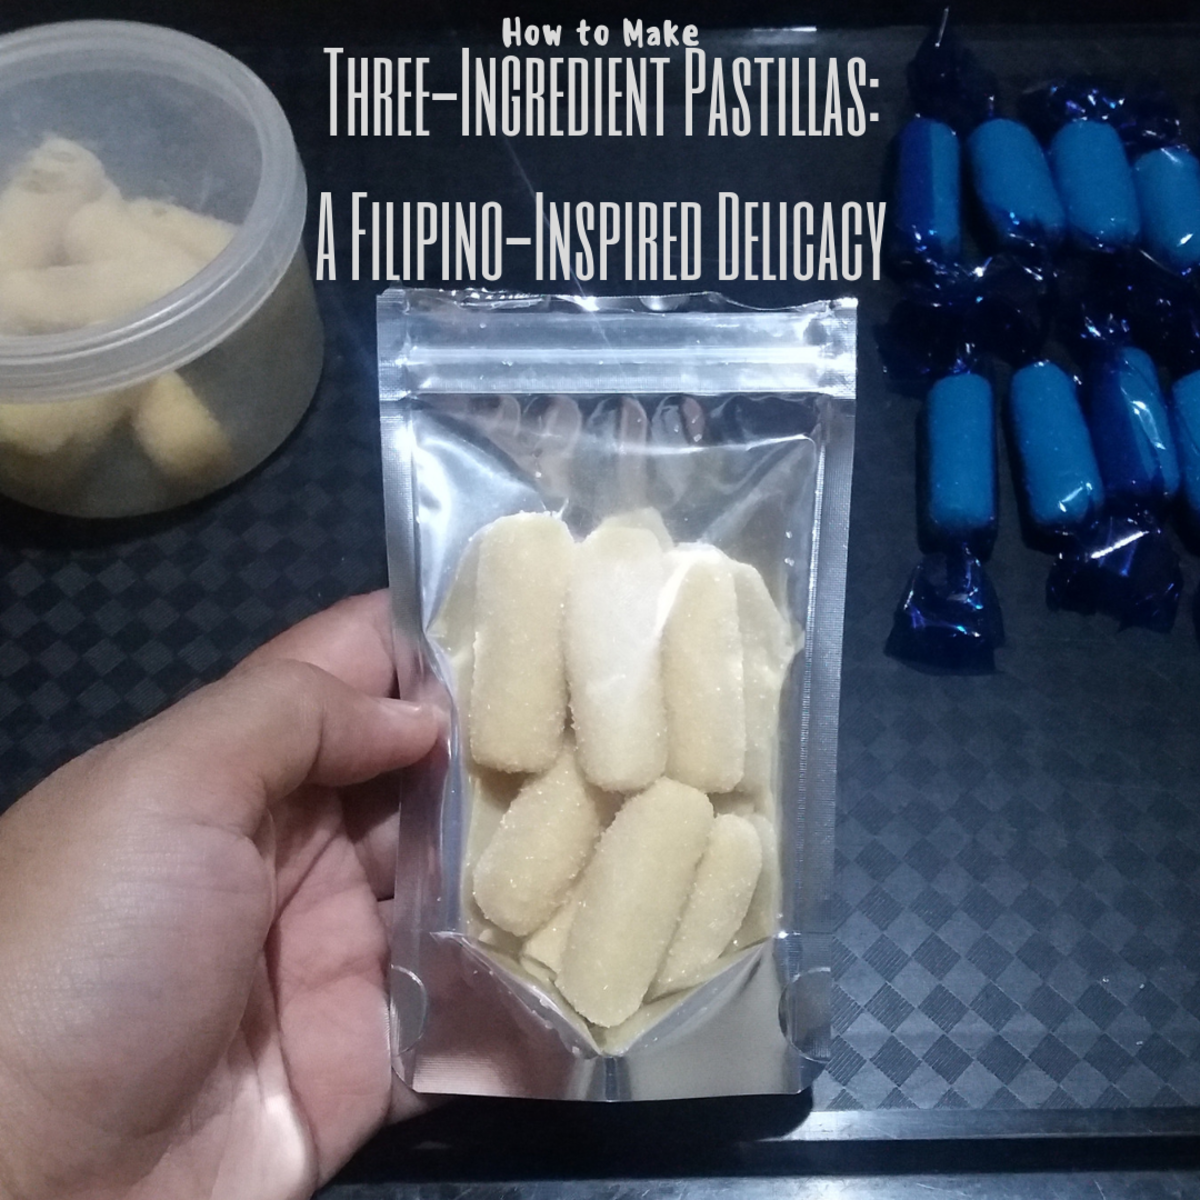 Learn how to make no cook three-ingredient pastillas, a Filipino-inspired delicacy.